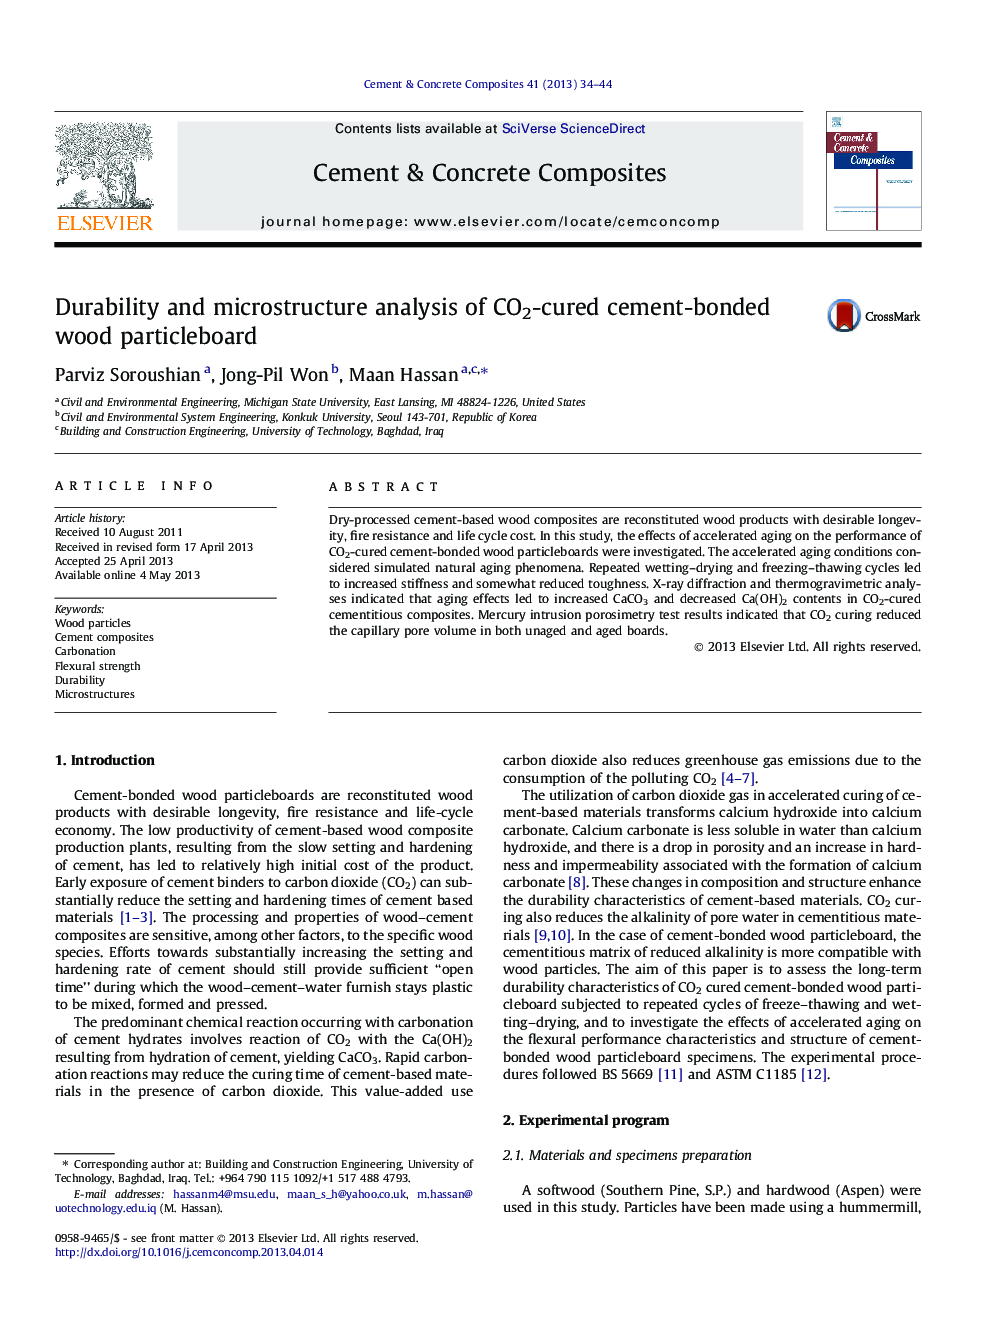 Durability and microstructure analysis of CO2-cured cement-bonded wood particleboard